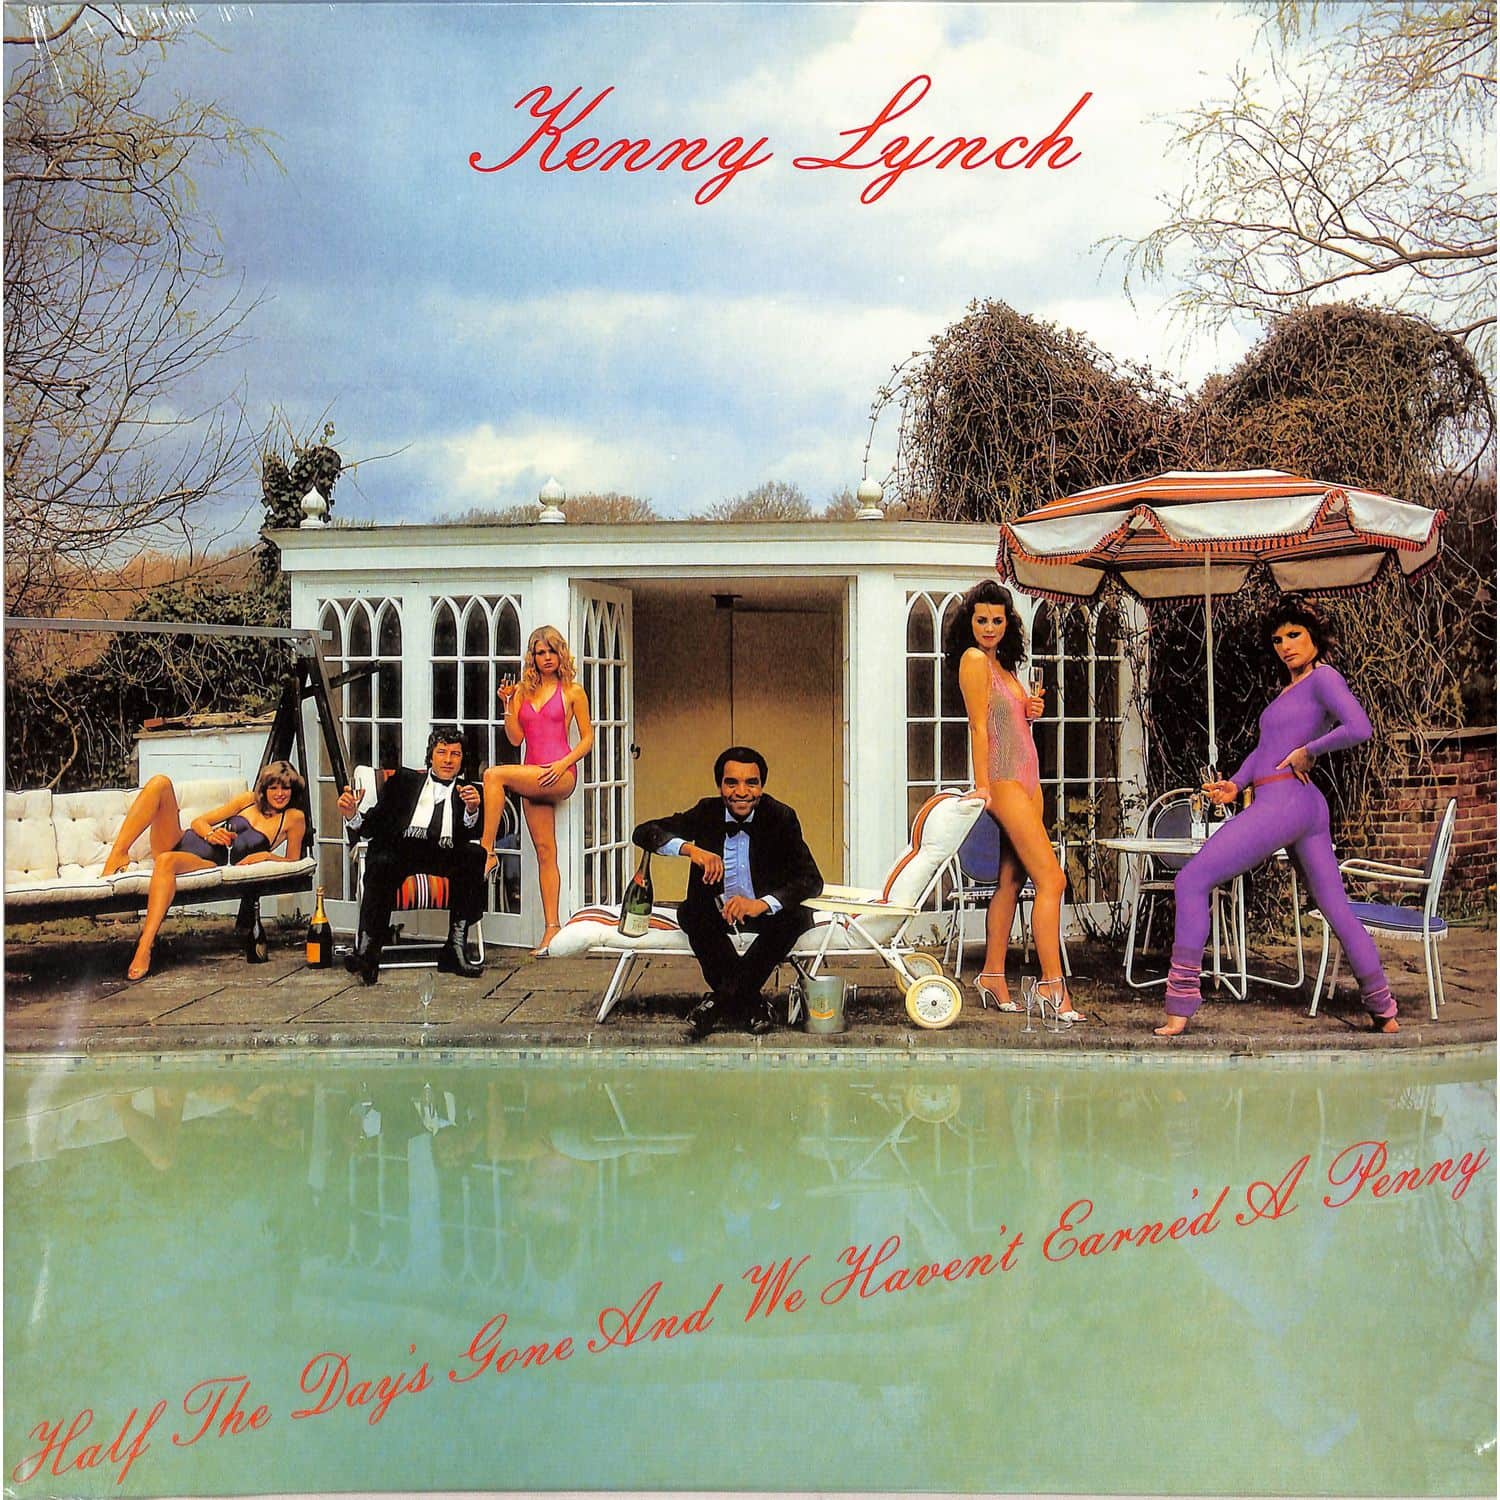 Kenny Lynch - HALF THE DAYS GONE AND WE HAVENT EARNED A PENNY ALBUM 